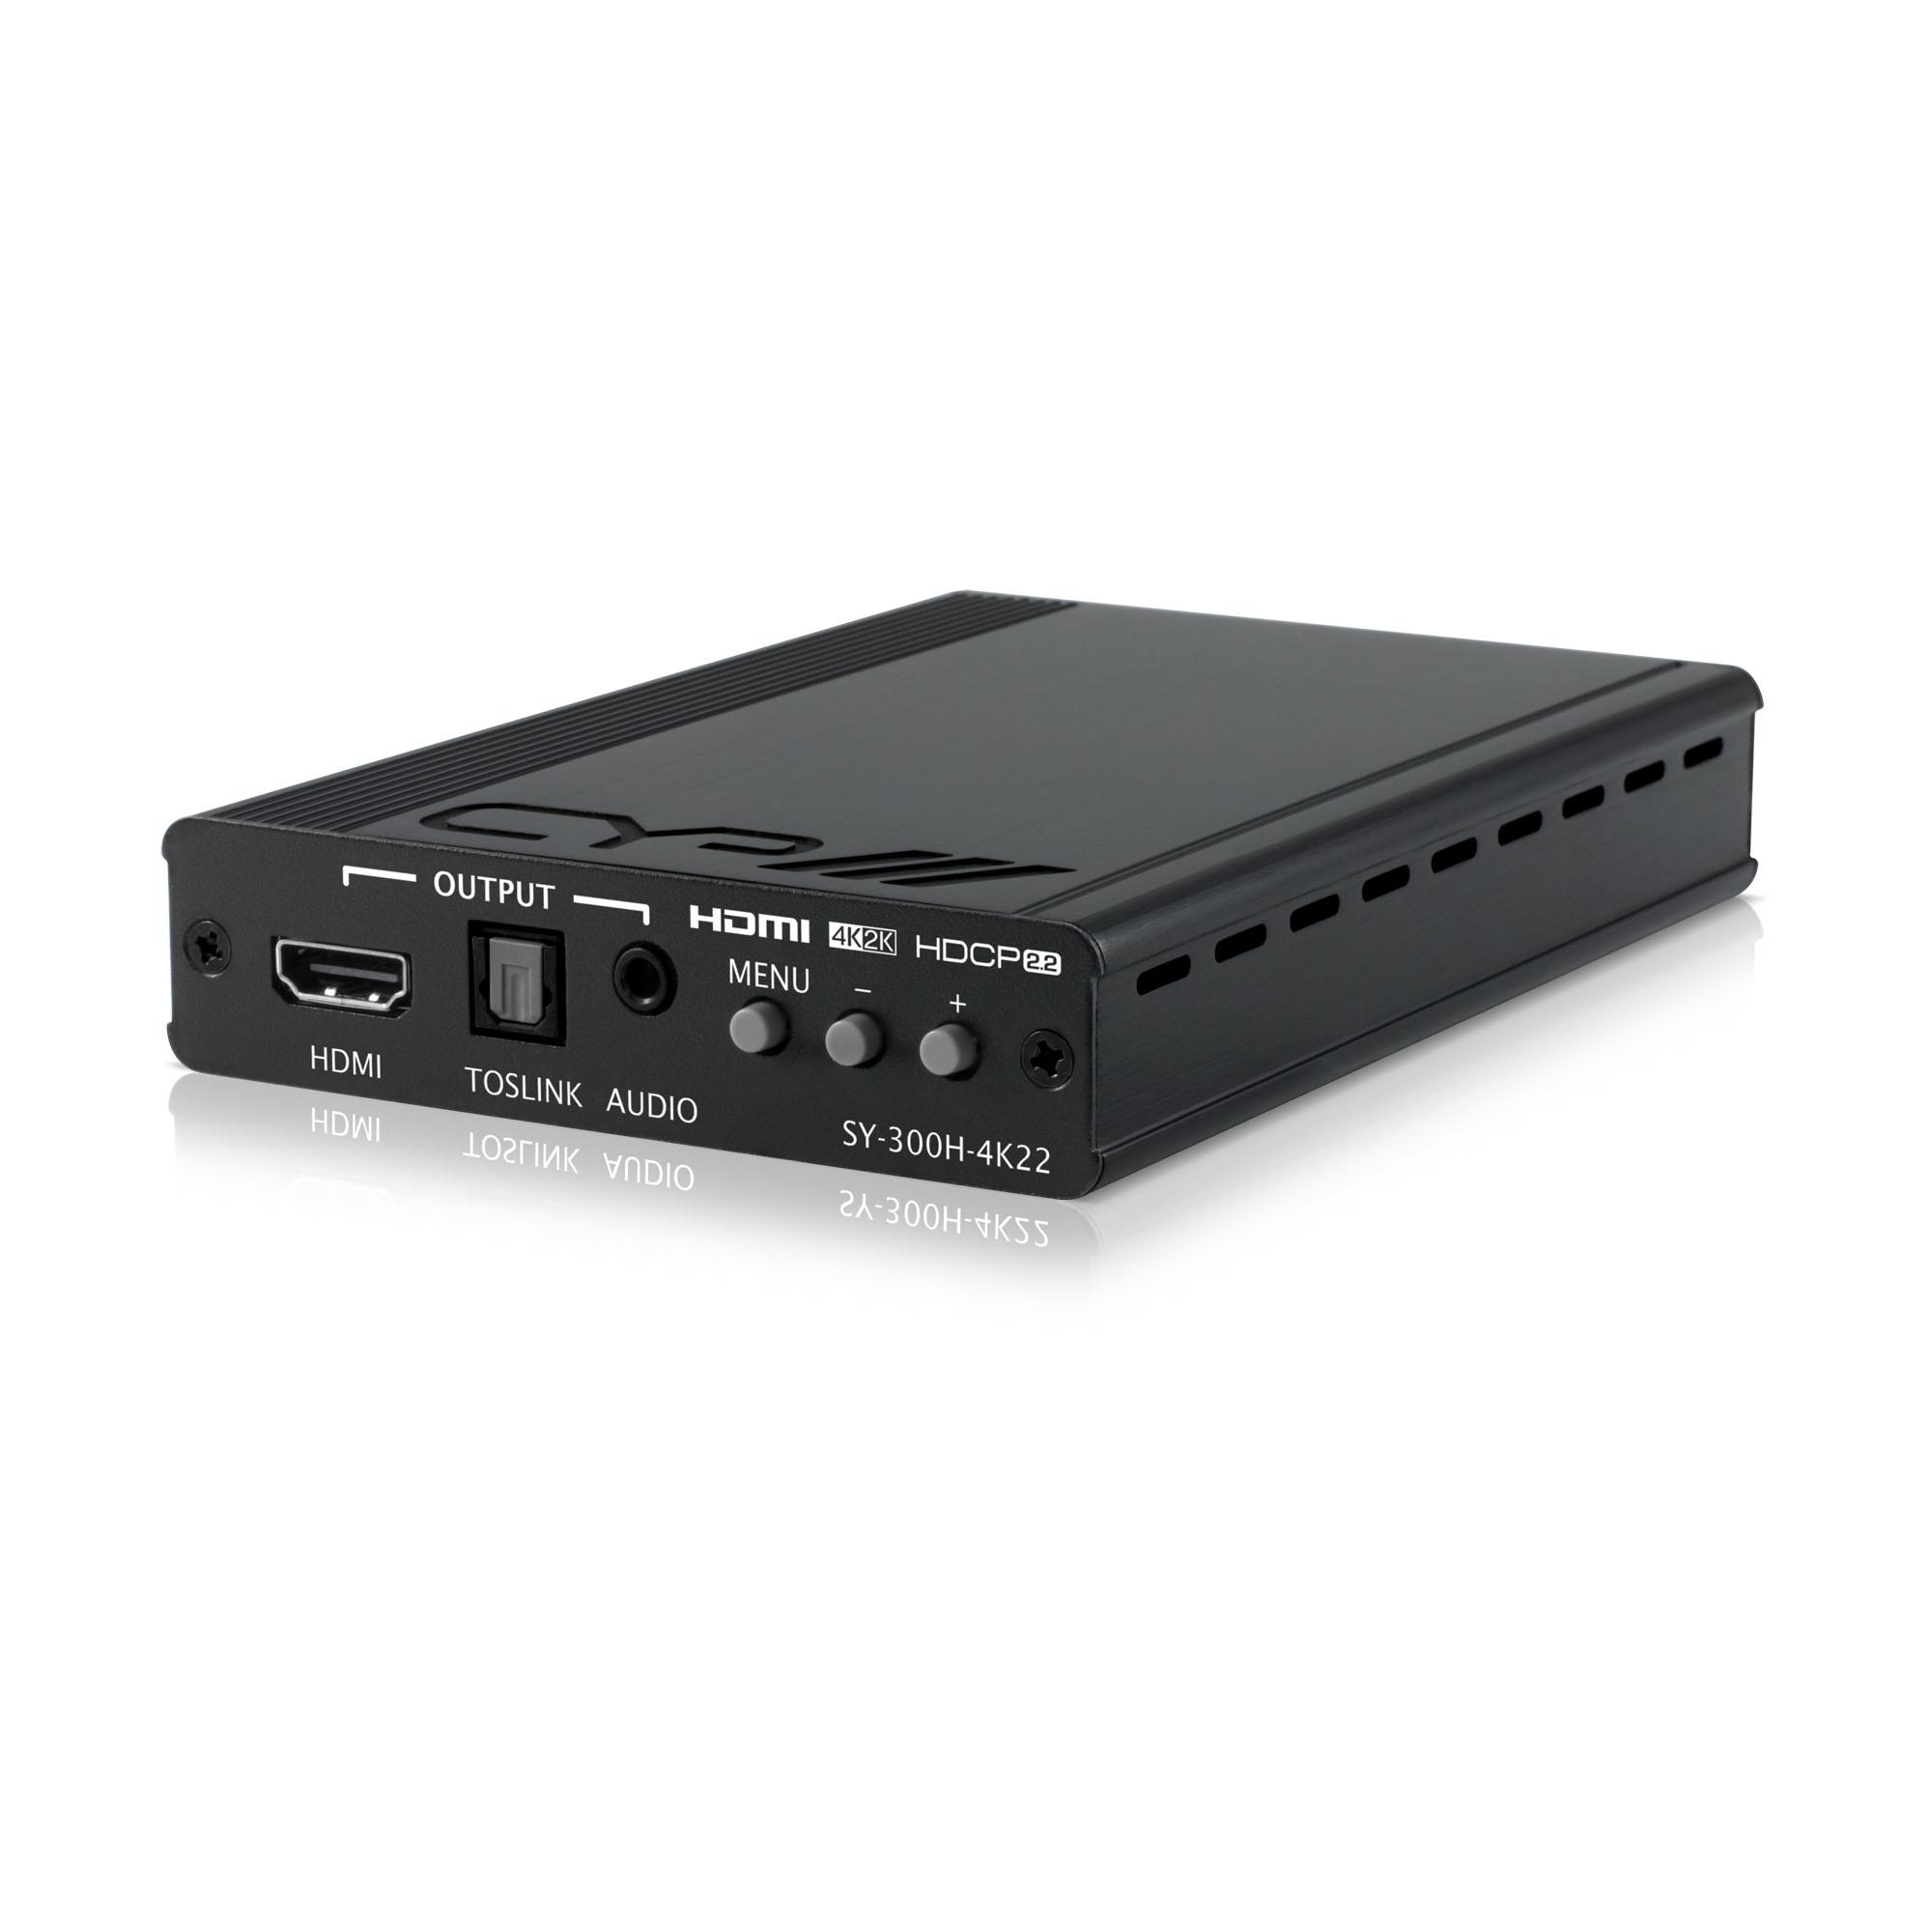 SY-300H-4K22 HDMI to HDMI Scaler with Audio Embedding & De-Embedding, 4KUHD Support, HDMI2.0, HDCP2.2